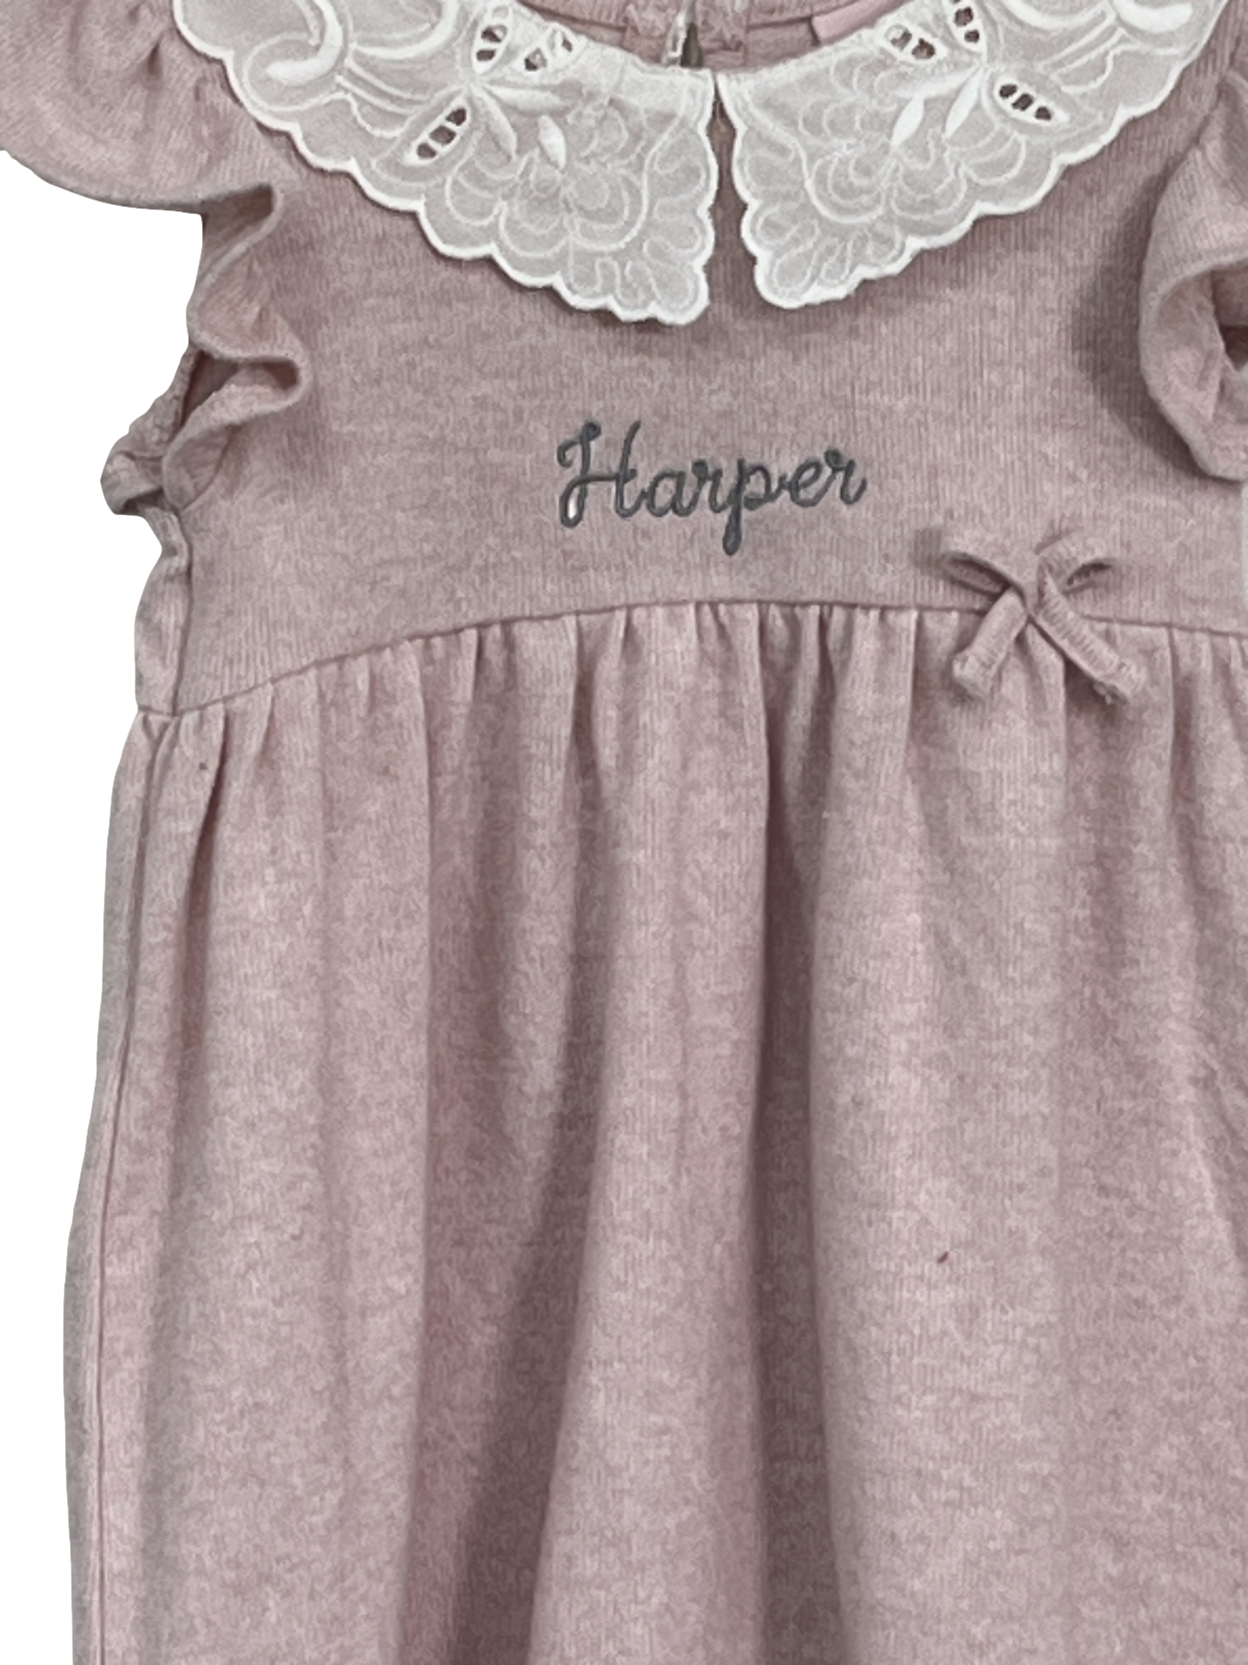 My 1st Years Pink Personalised 'harper' Dress With Lace Collar 12-18 Months